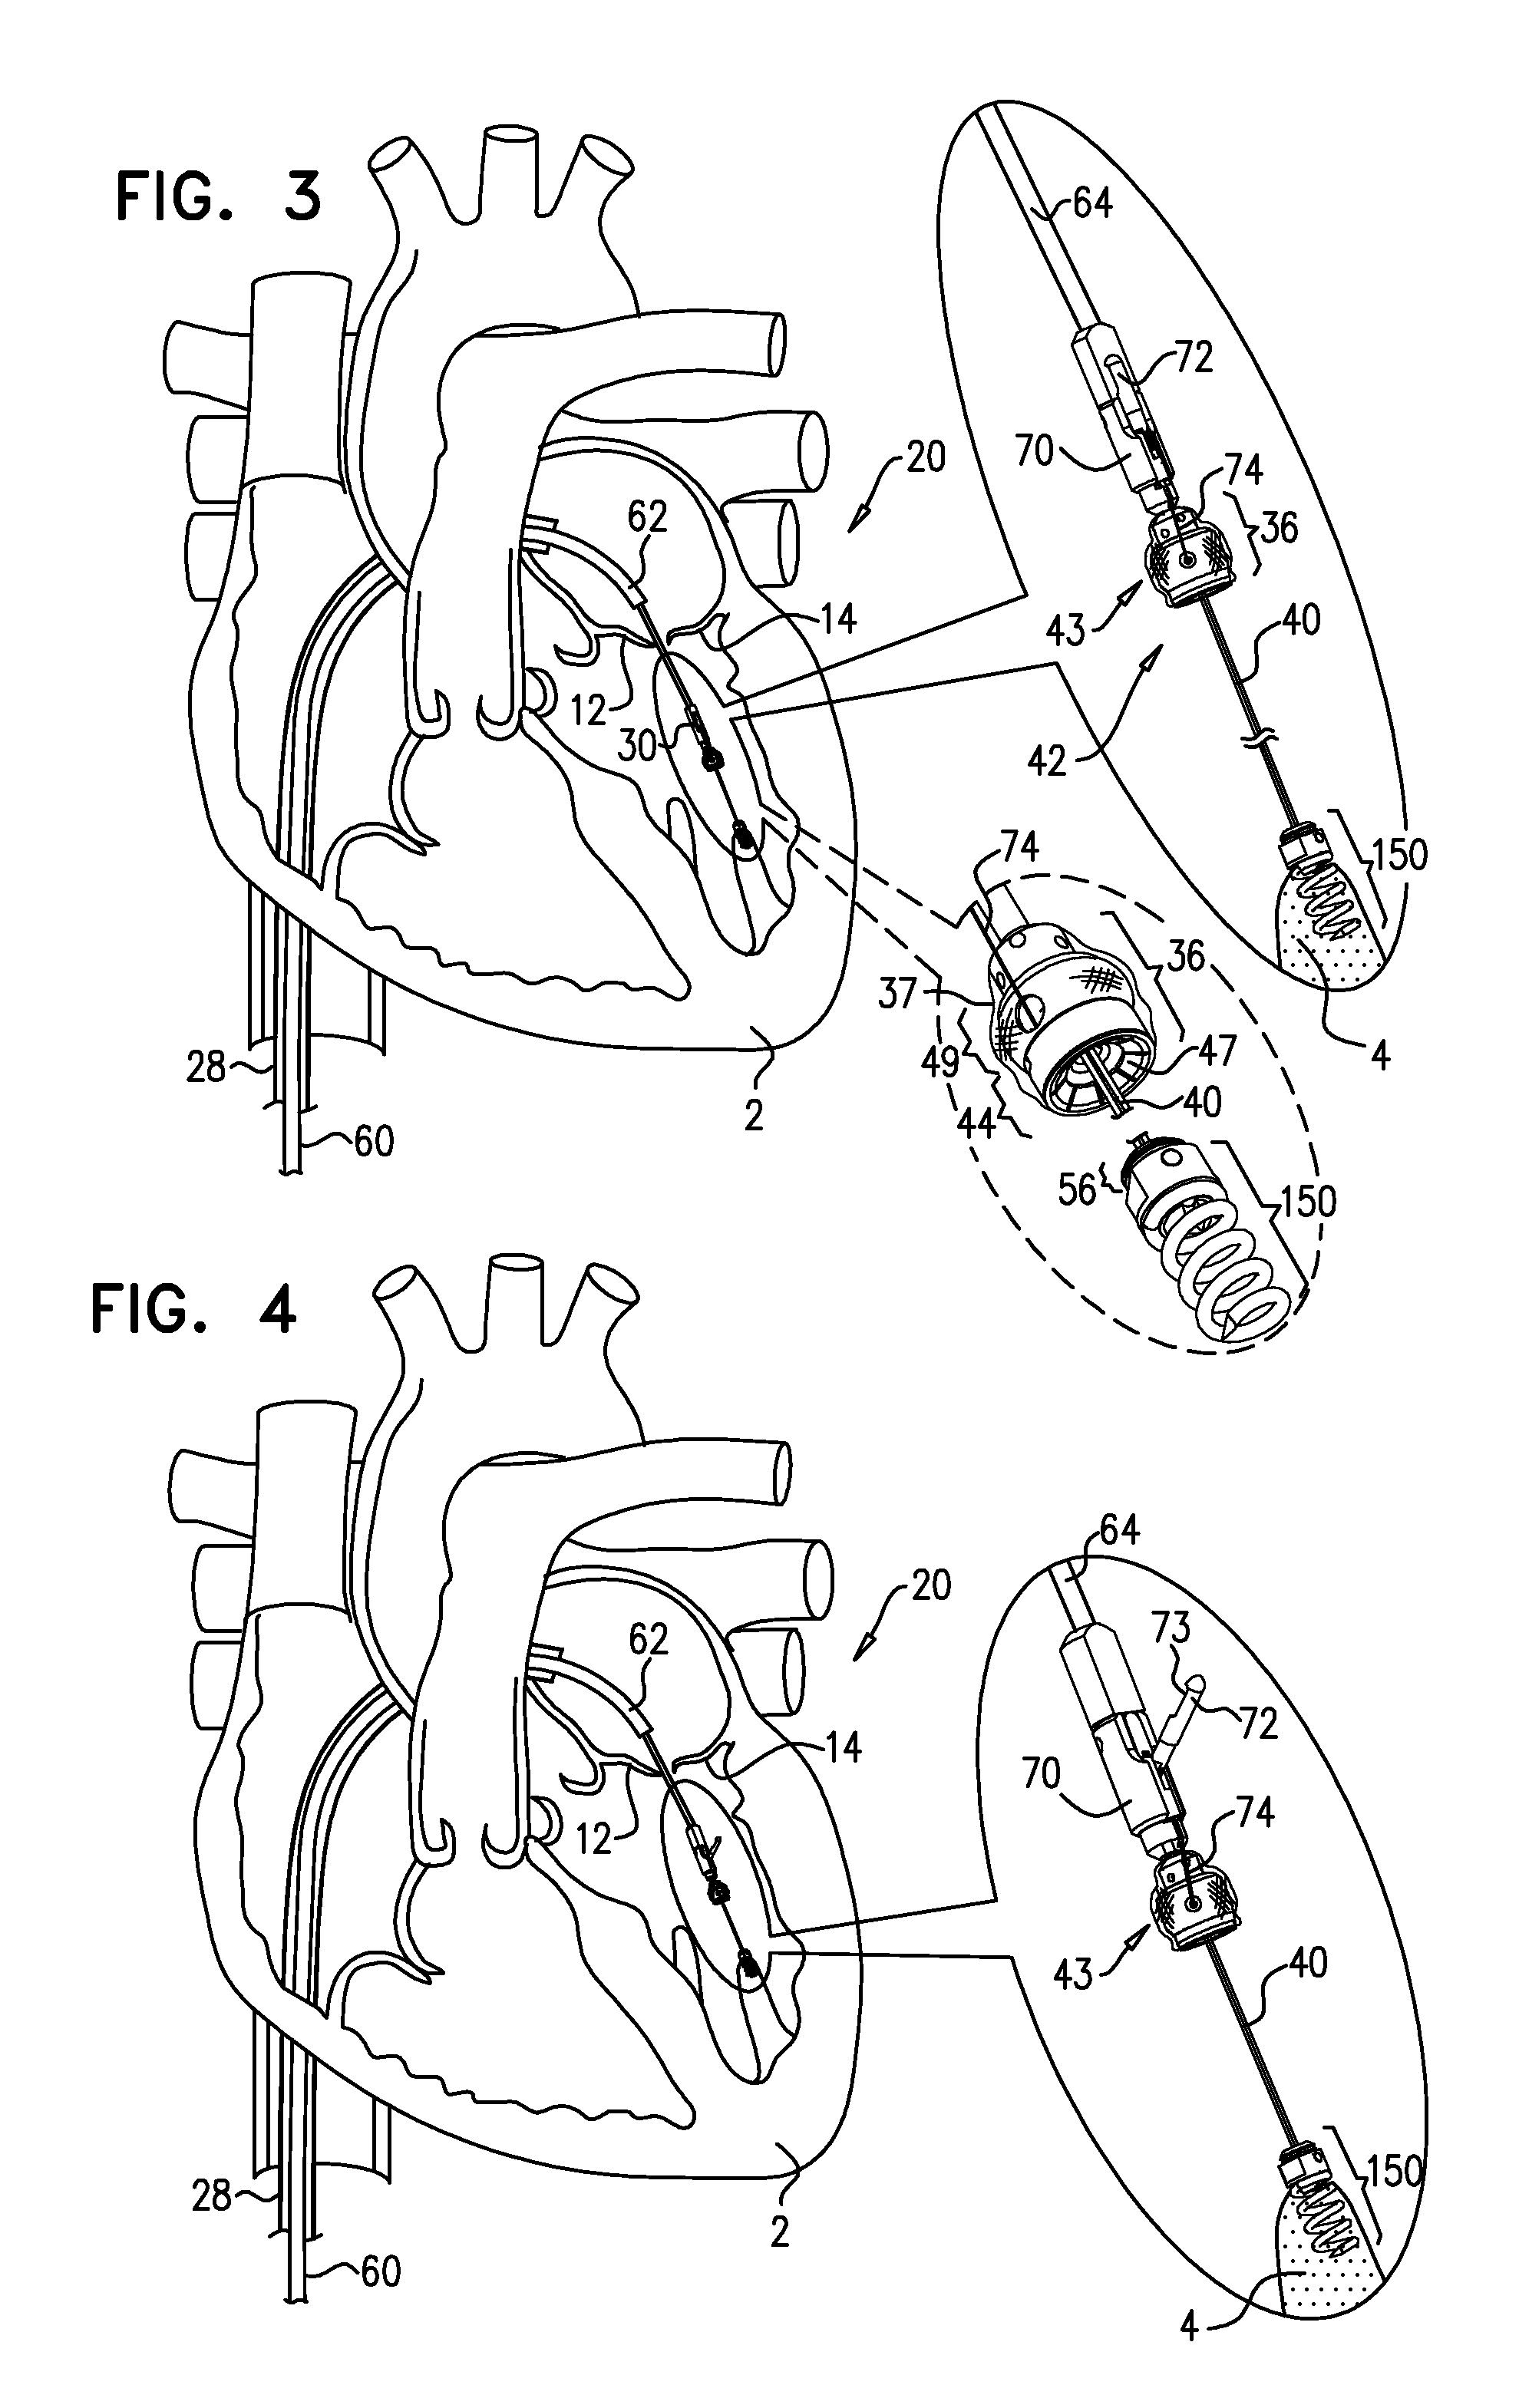 Apparatus and method for guide-wire based advancement of a rotation assembly